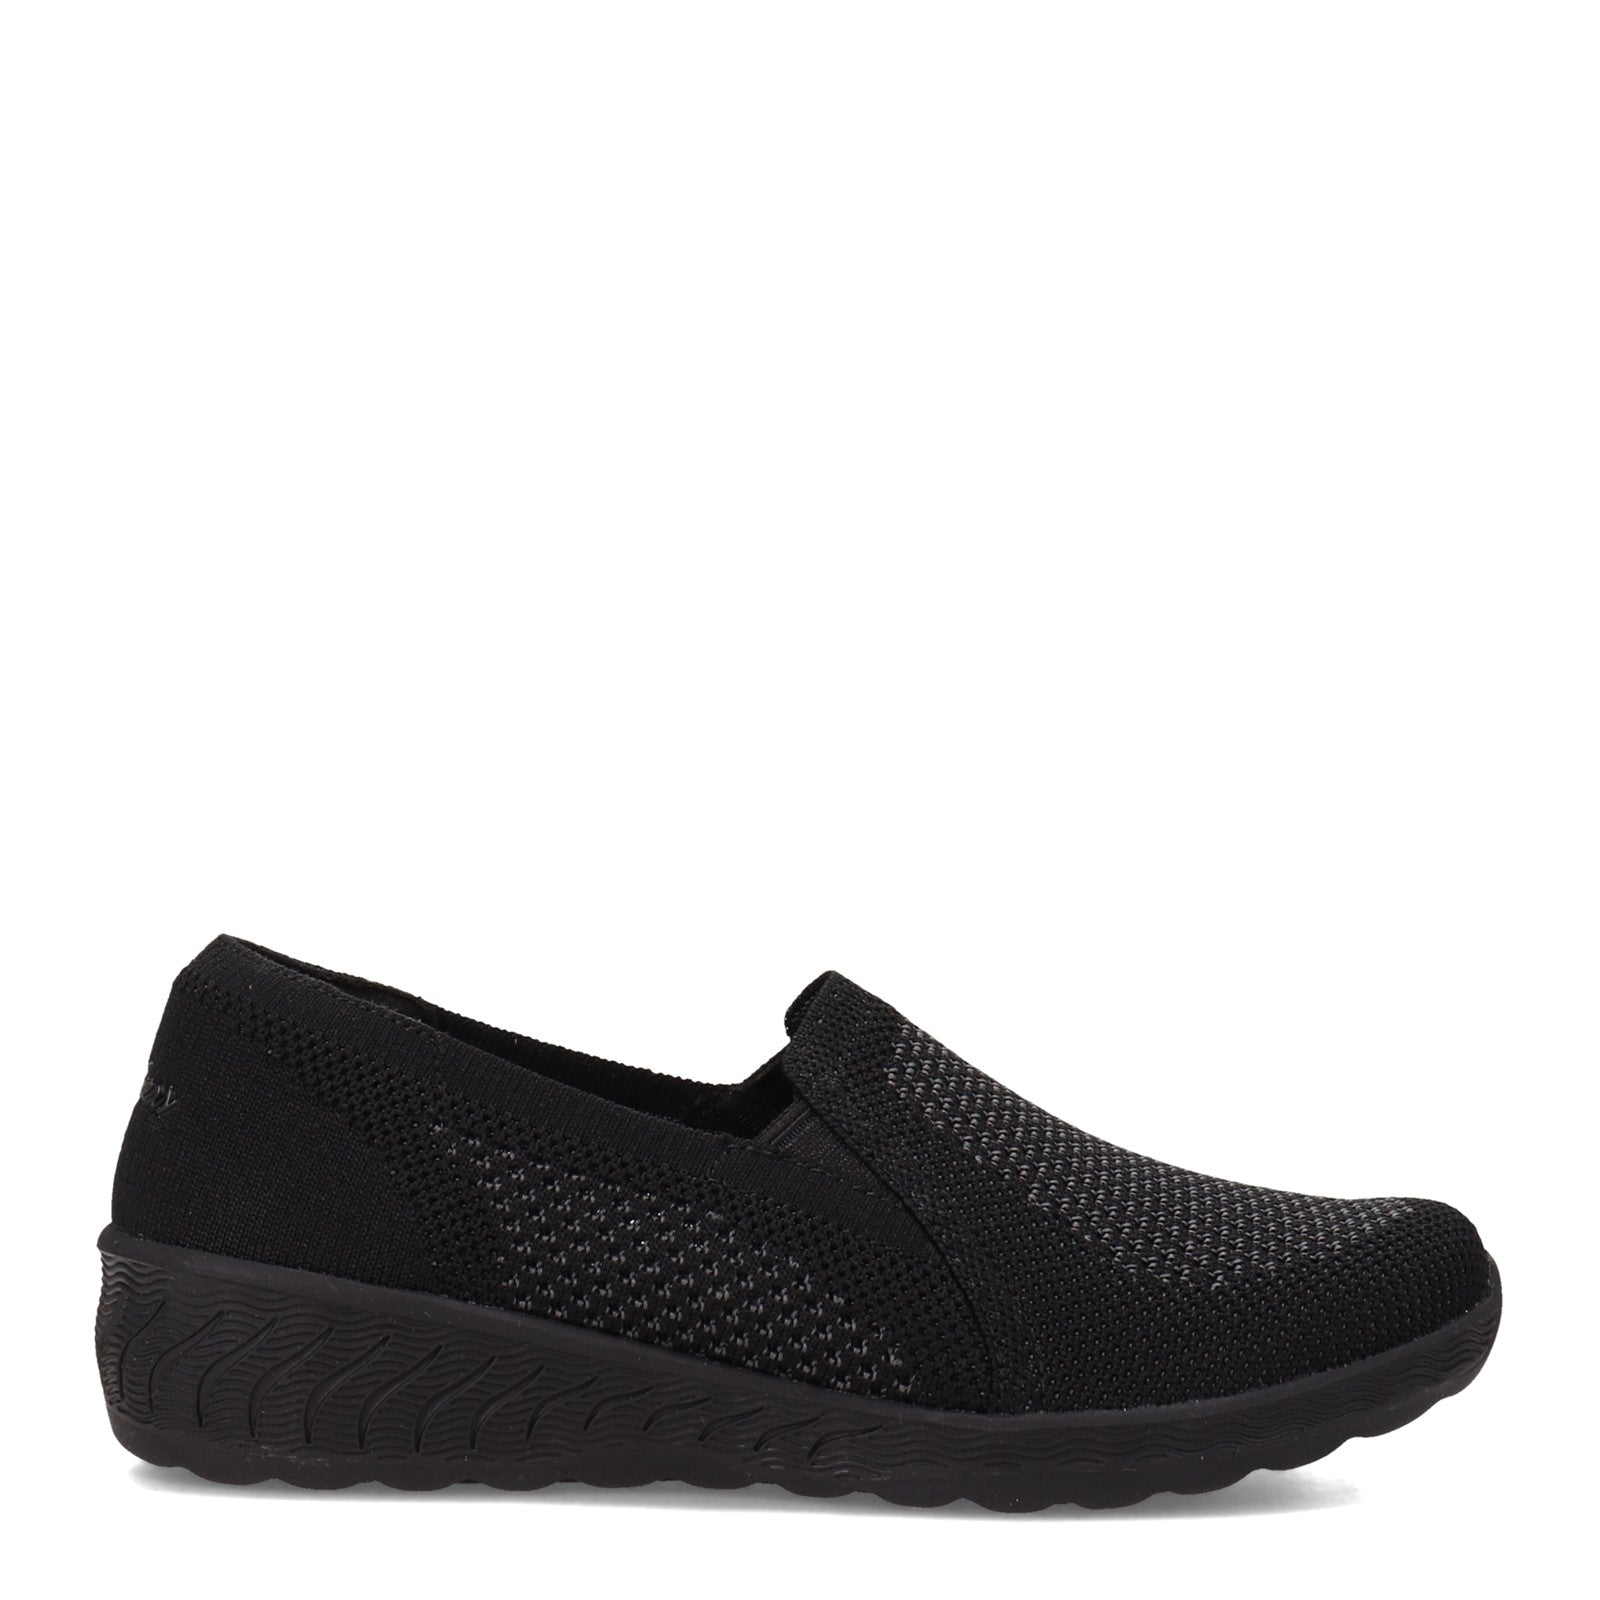 Women's Skechers, Relaxed Fit: Up-Lifted - New Rules Slip-On